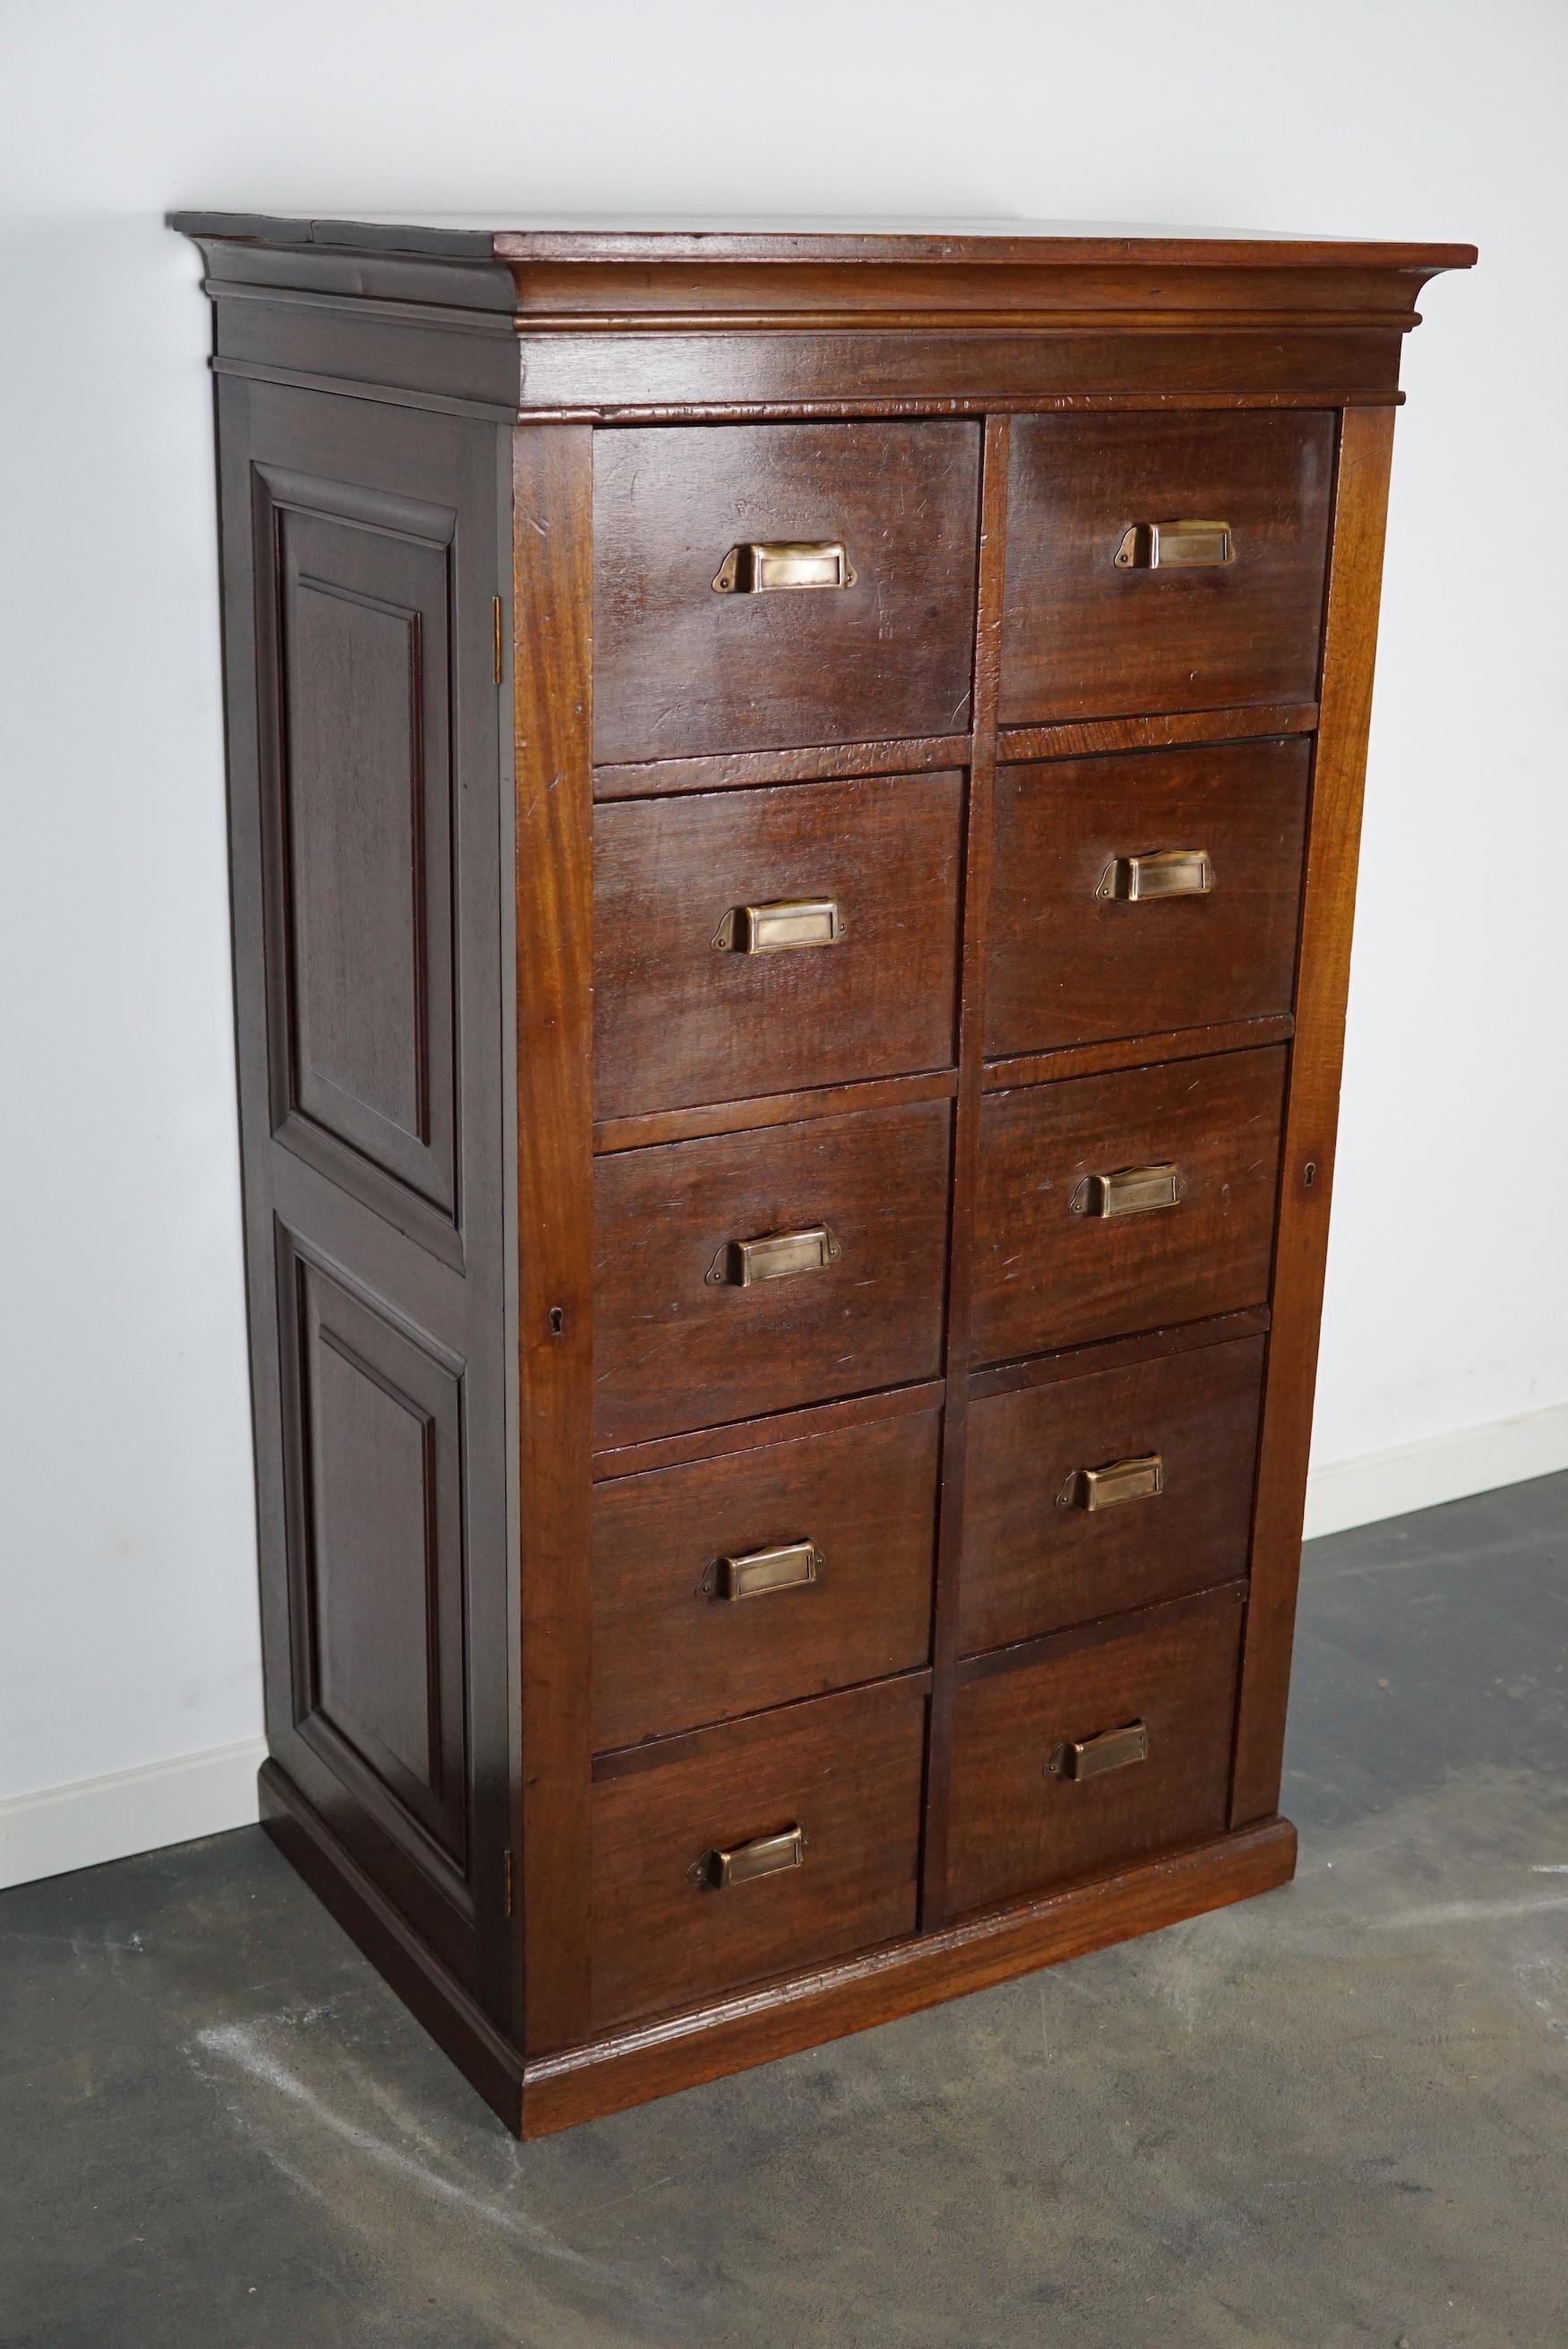 This vintage mahogany bank of drawers dates from the 1920/1930s and was made in the Netherlands. It features a mahogany frame, drawers with mahogany fronts and brass handles. The drawers can be locked but there are no keys included.